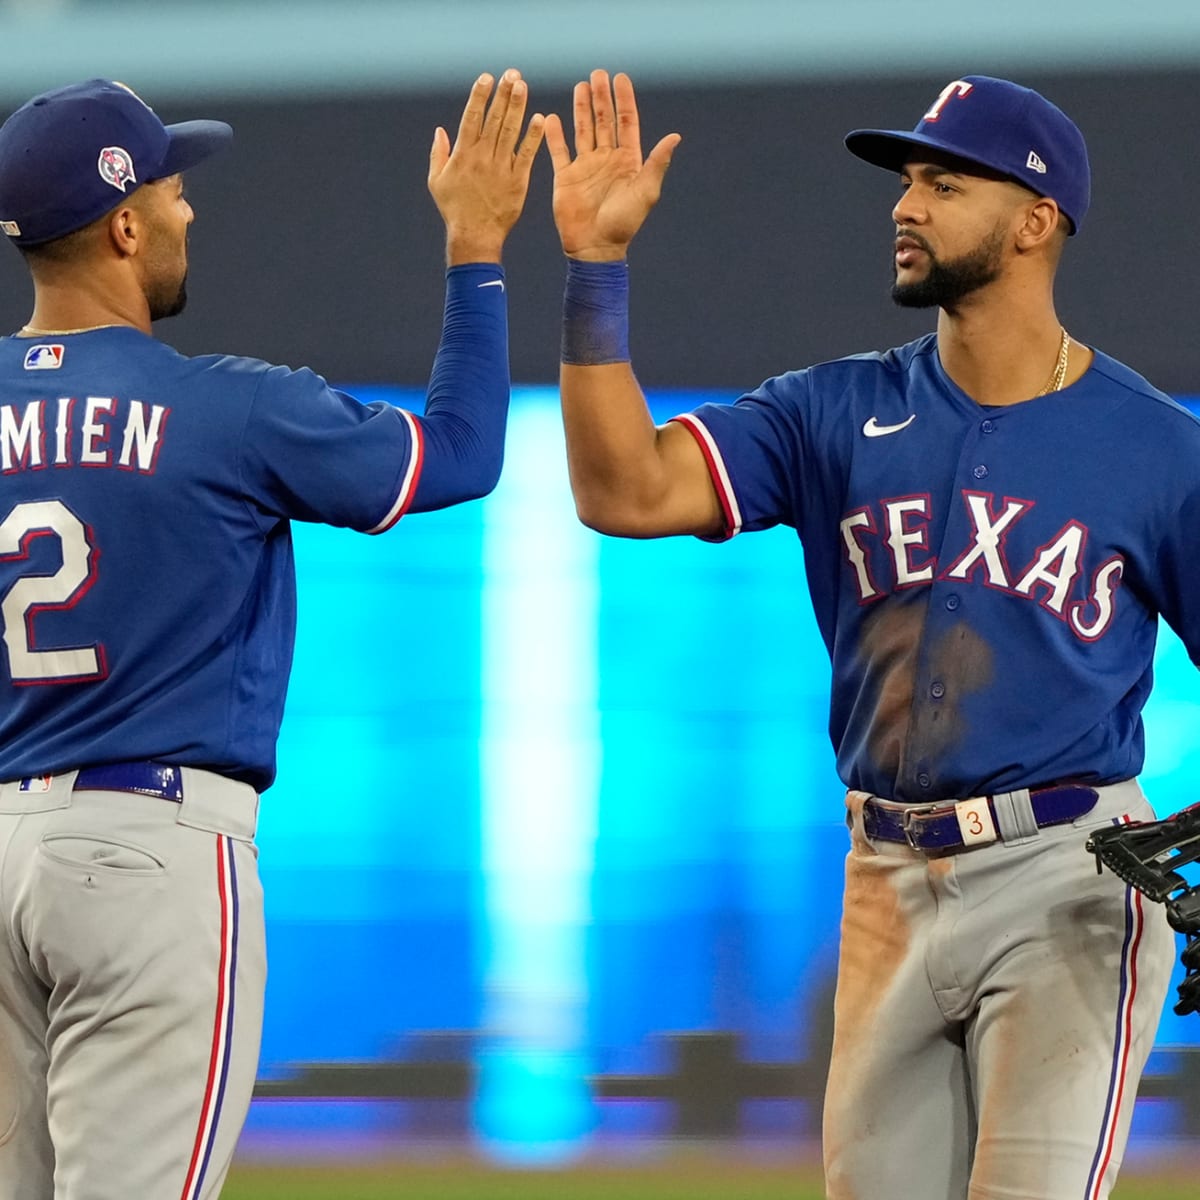 Texas Rangers Now Betting Favorite to Make MLB Playoffs - Sports